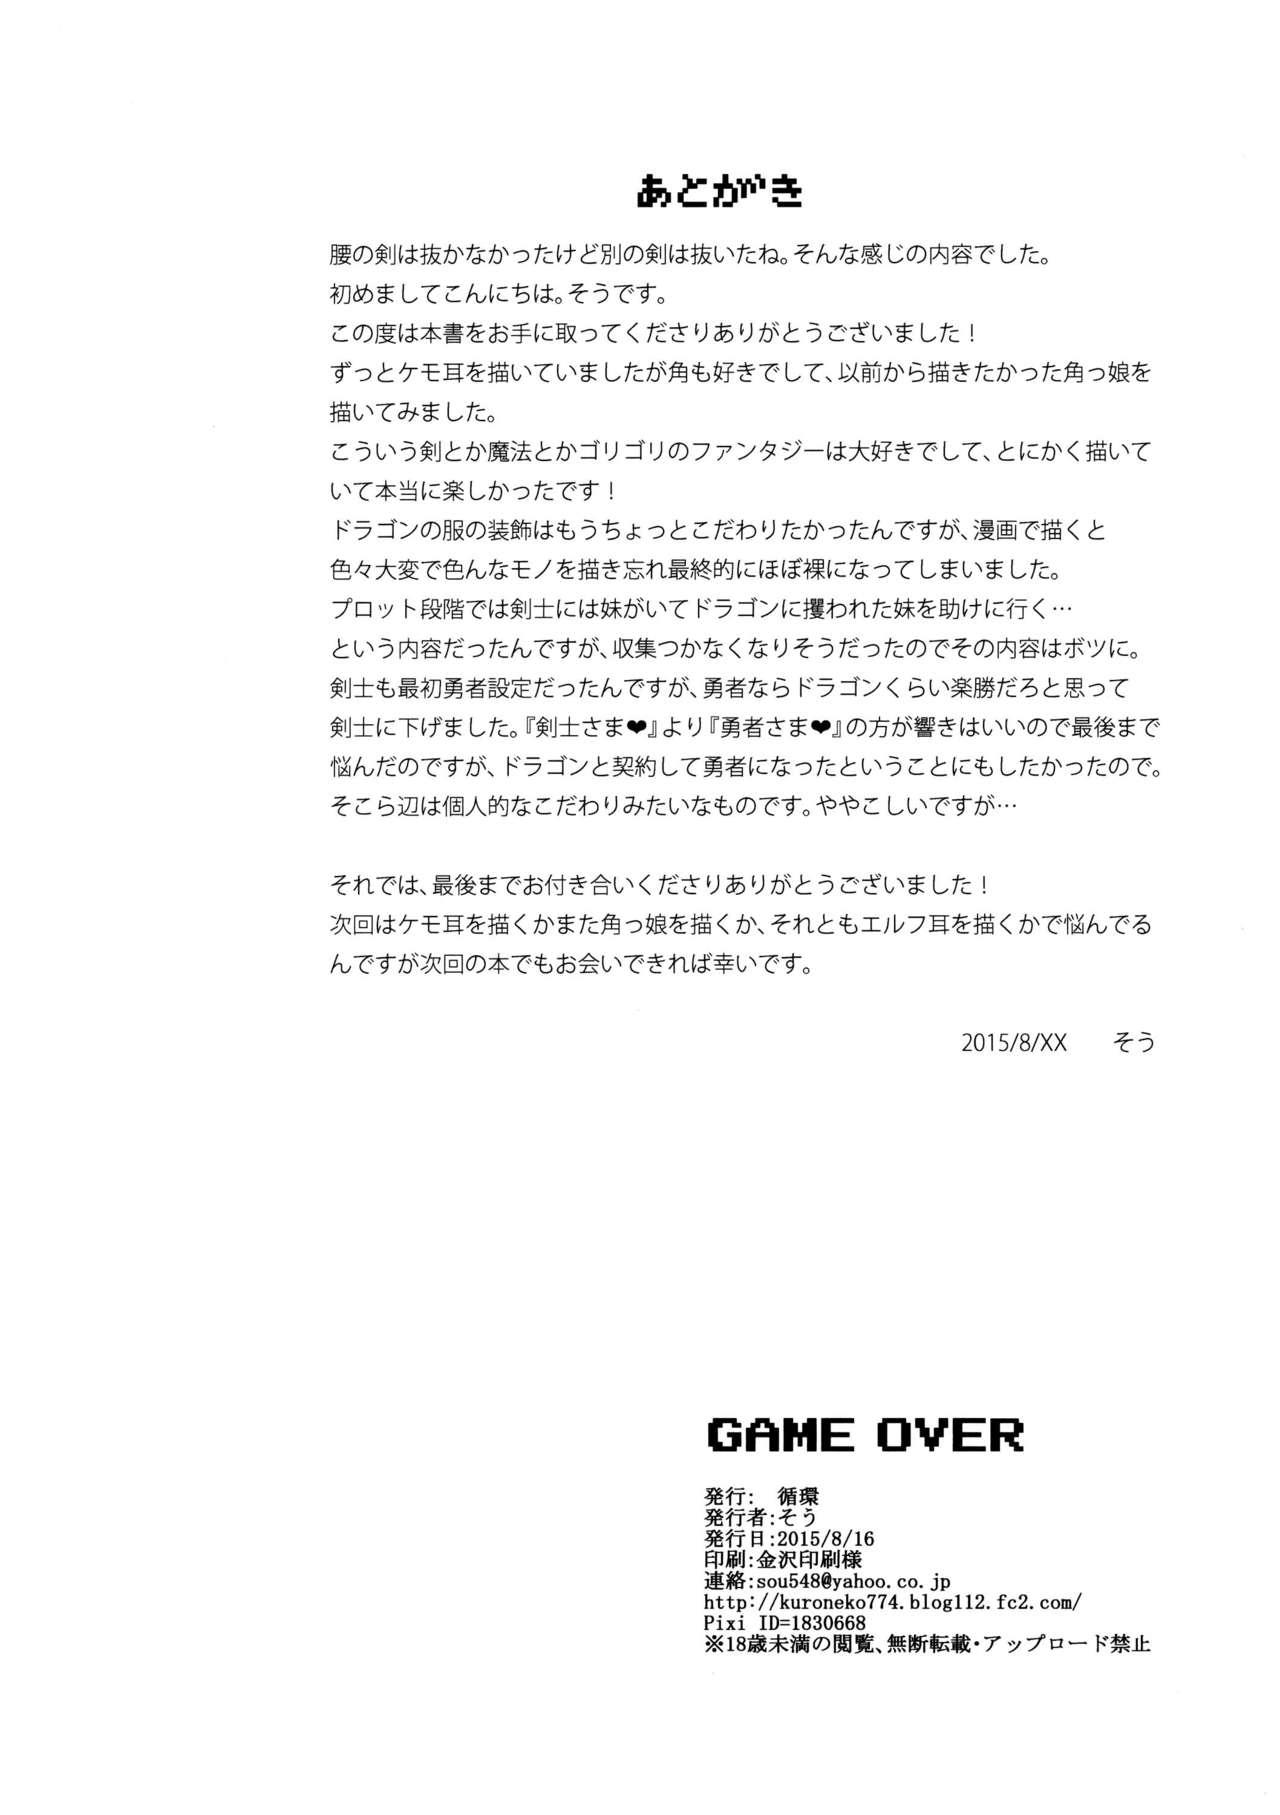 GAME OVER 26